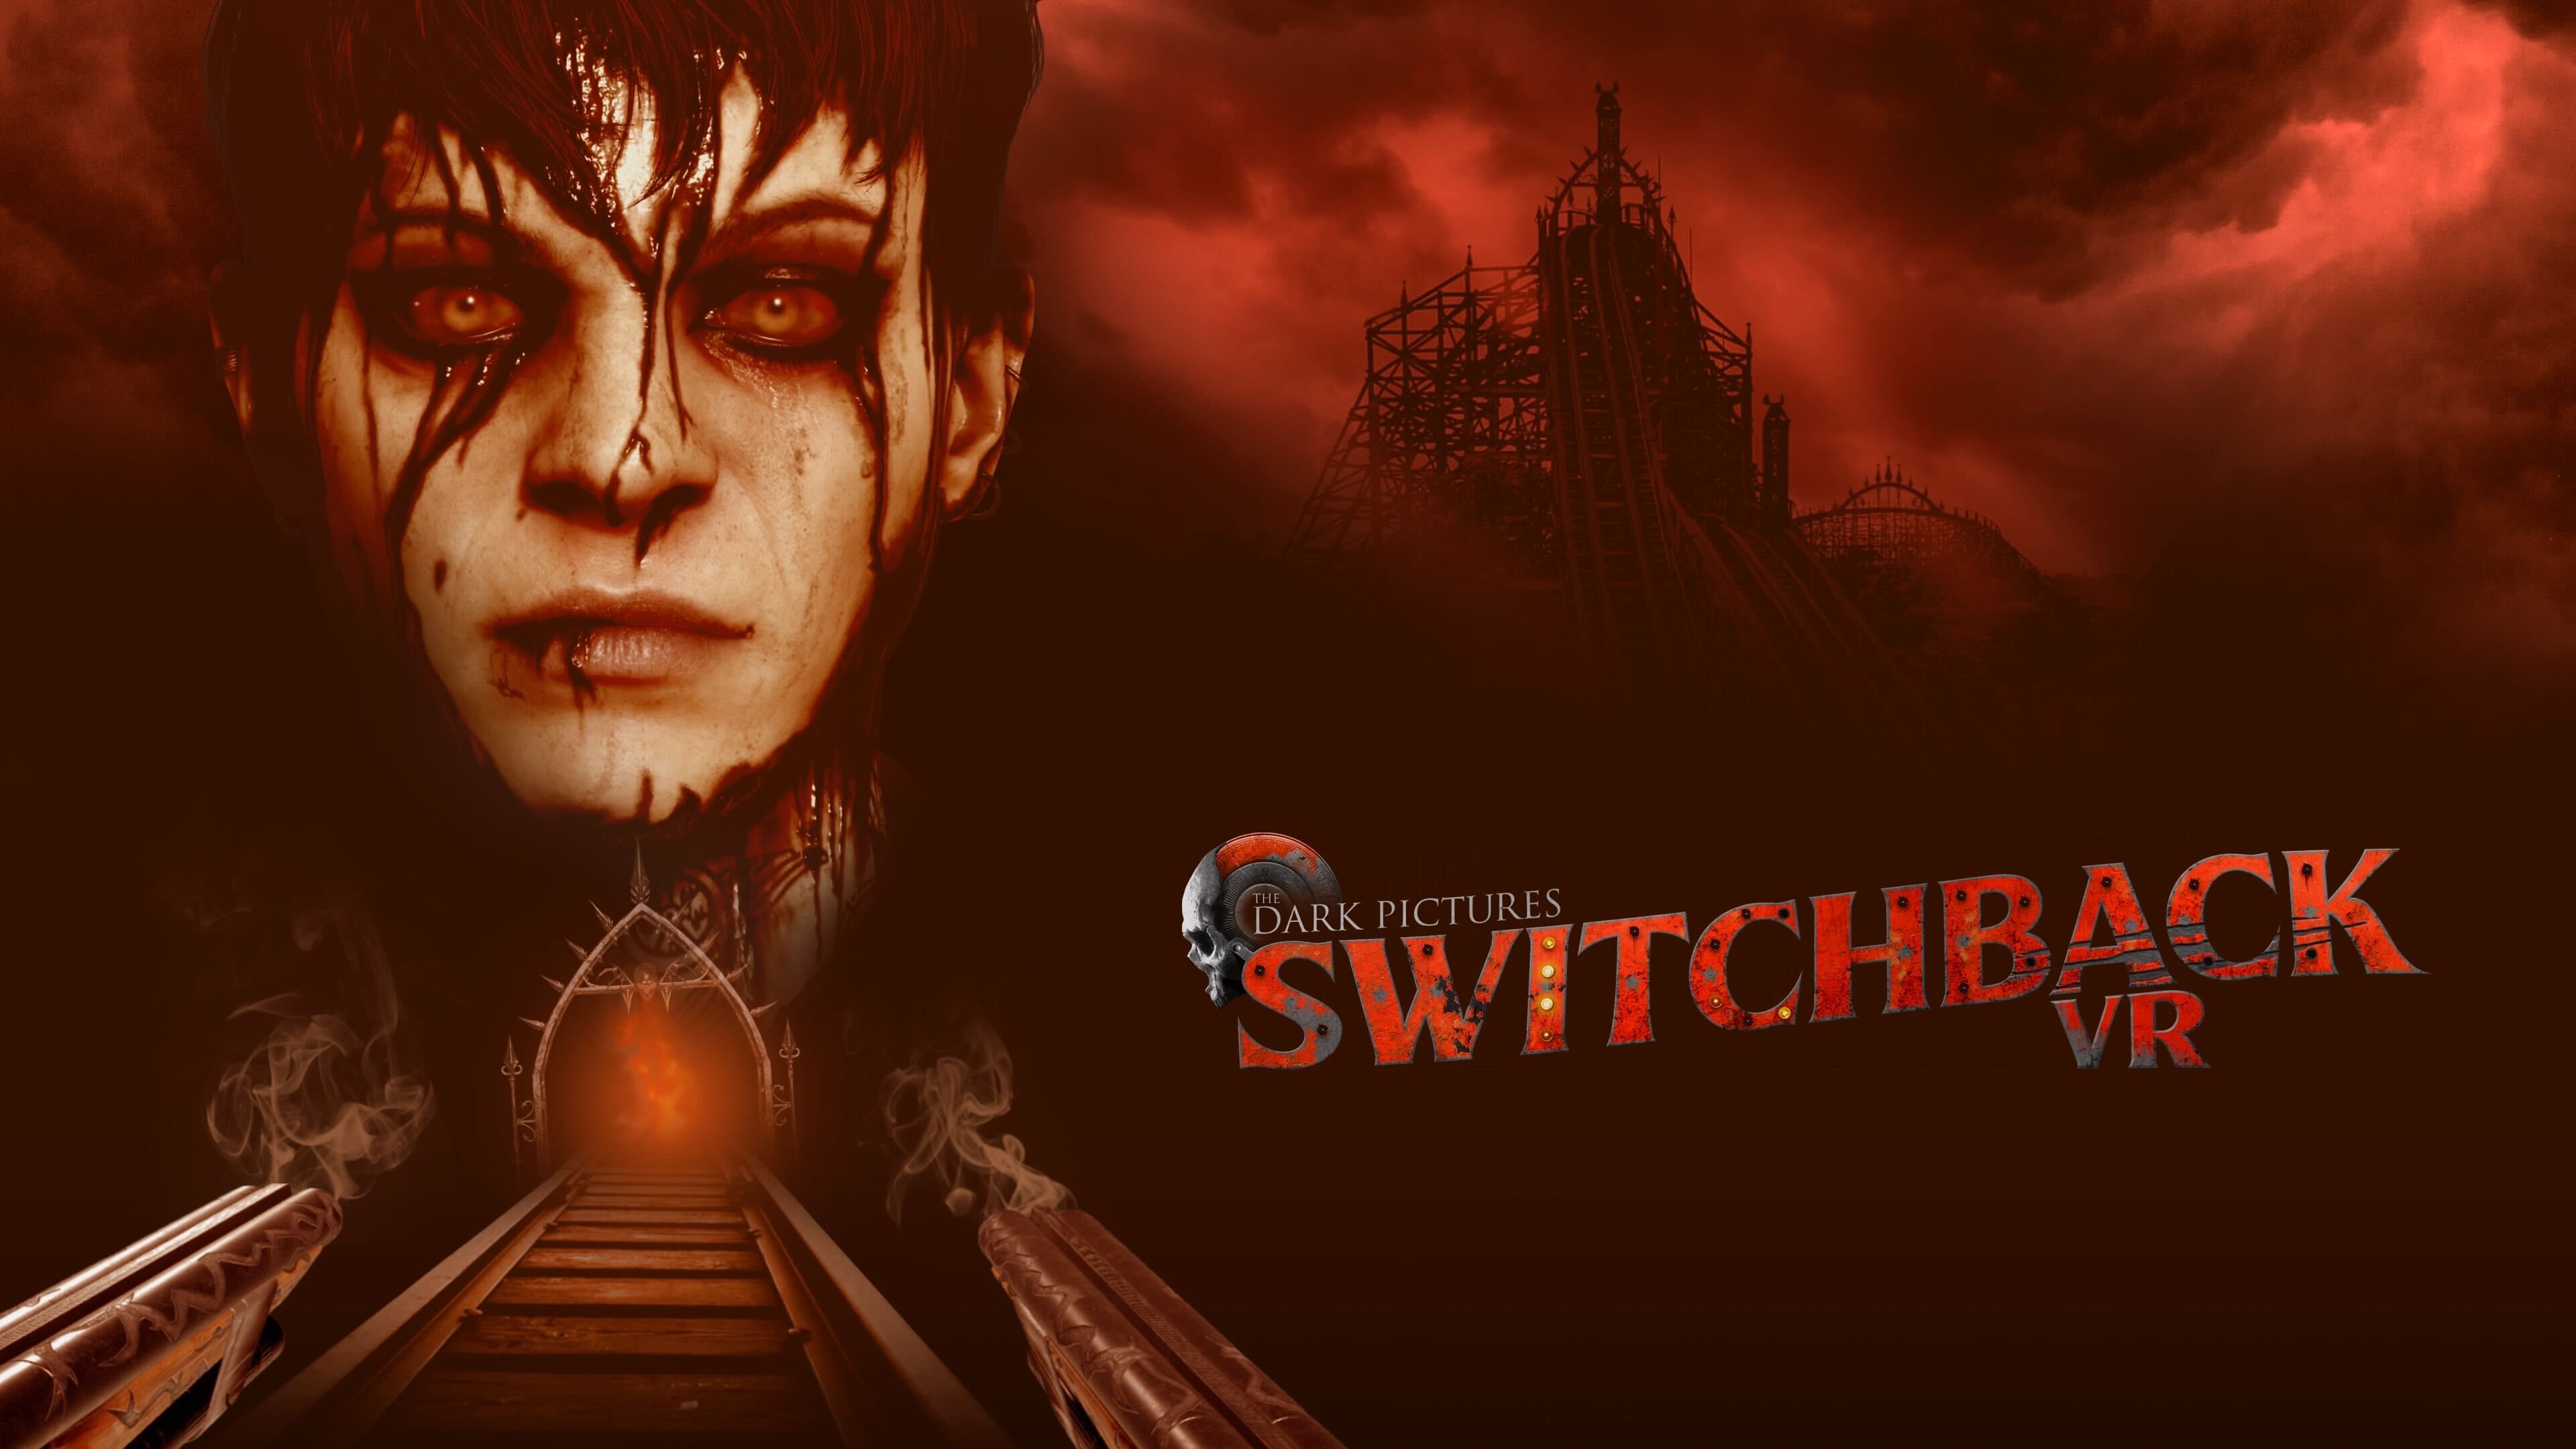 the dark pictures switchback vr review